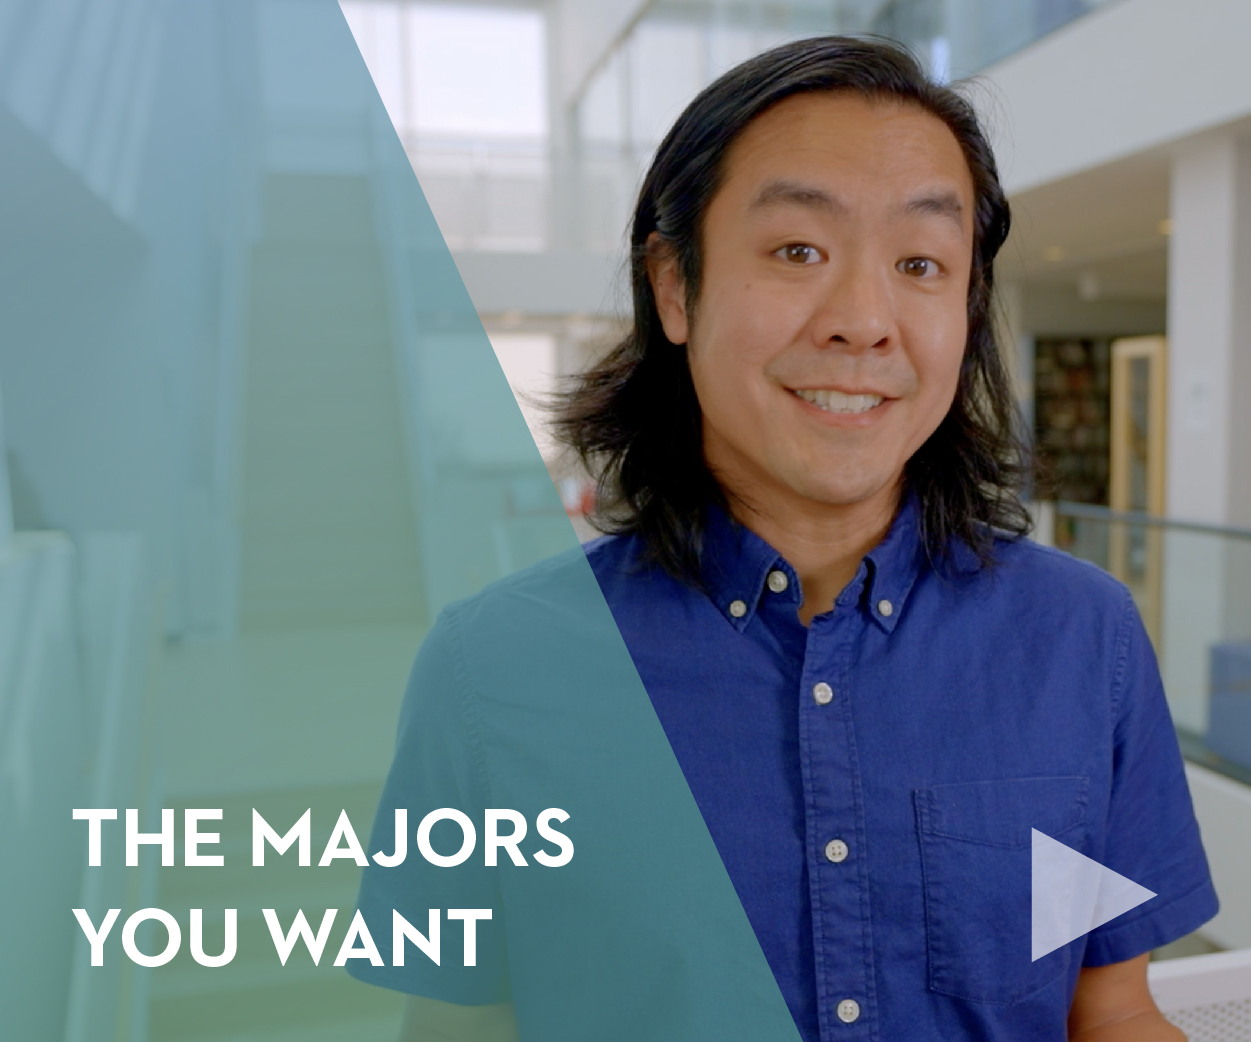 The majors you want - video play button